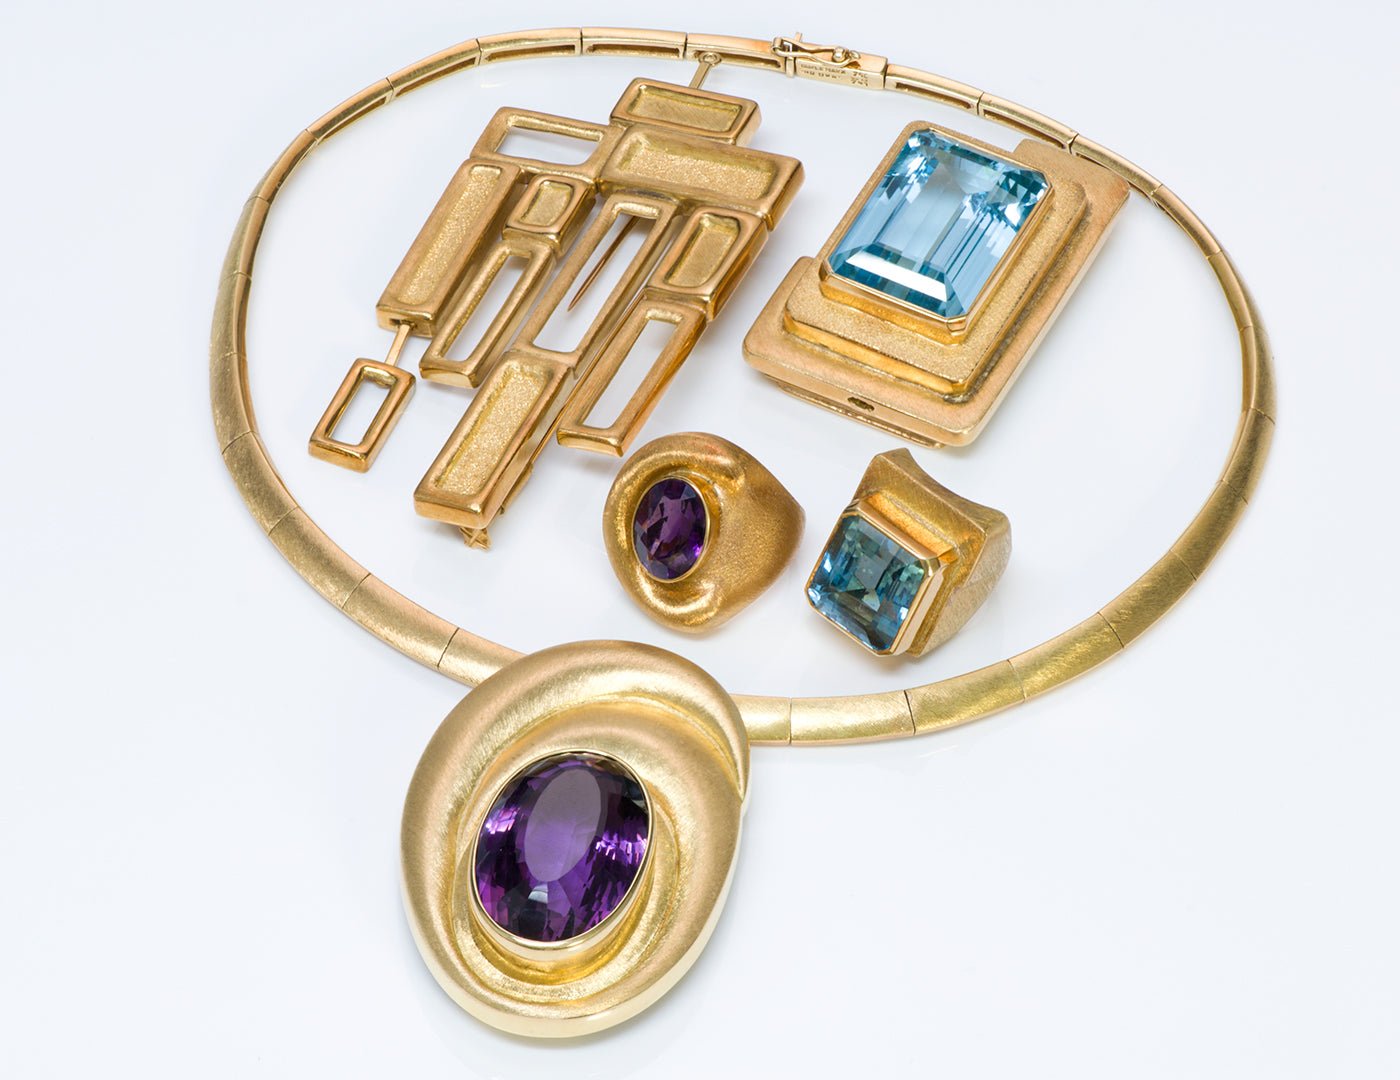 Burle Marx 18K Gold Aquamarine Amethyst Necklace Brooch Ring - DSF Antique Jewelry